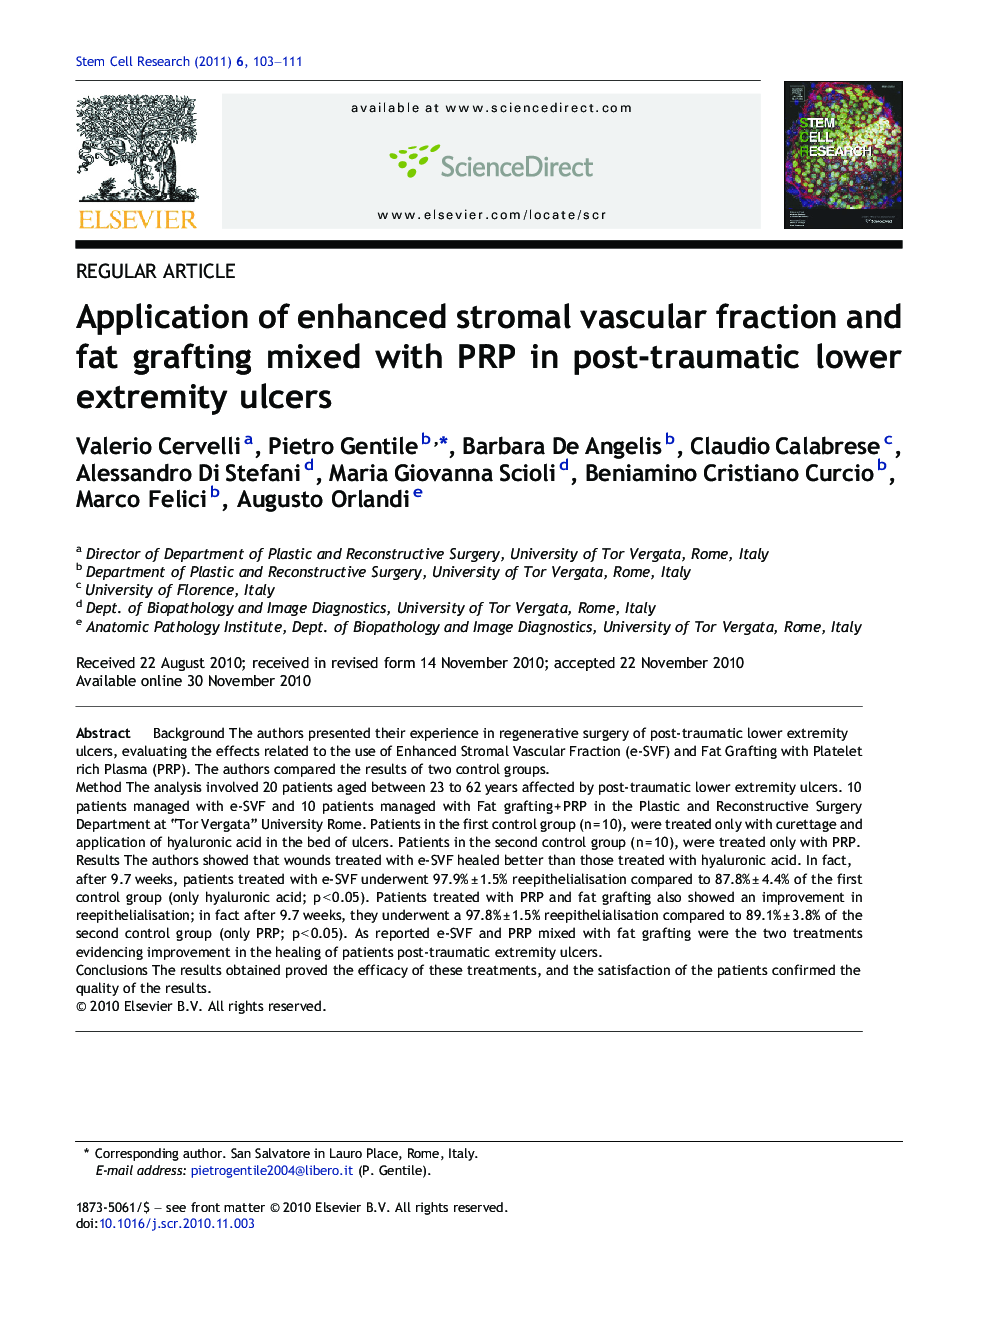 Application of enhanced stromal vascular fraction and fat grafting mixed with PRP in post-traumatic lower extremity ulcers